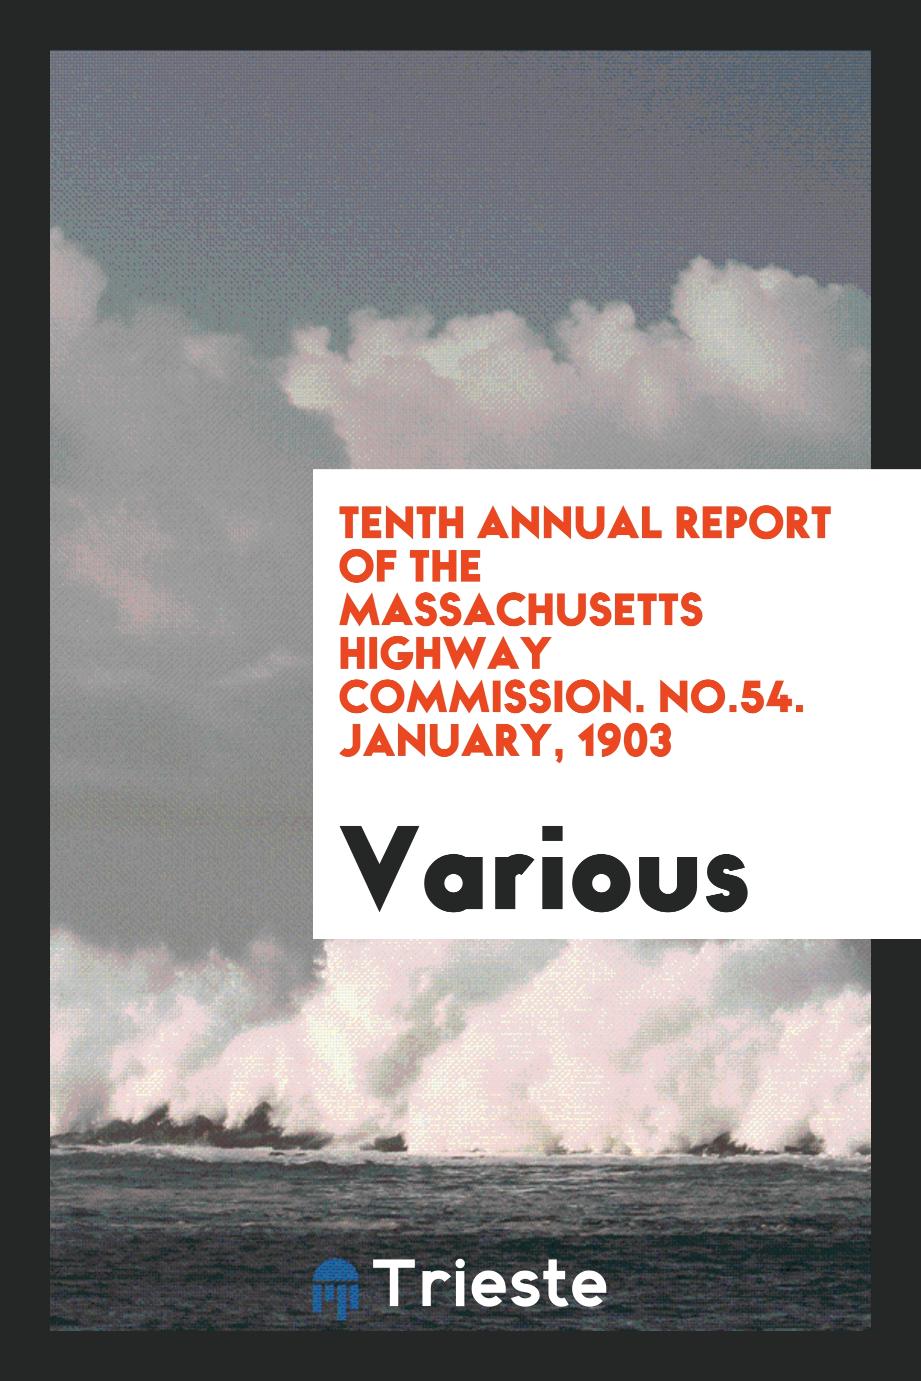 Tenth Annual Report of the Massachusetts Highway Commission. No.54. January, 1903